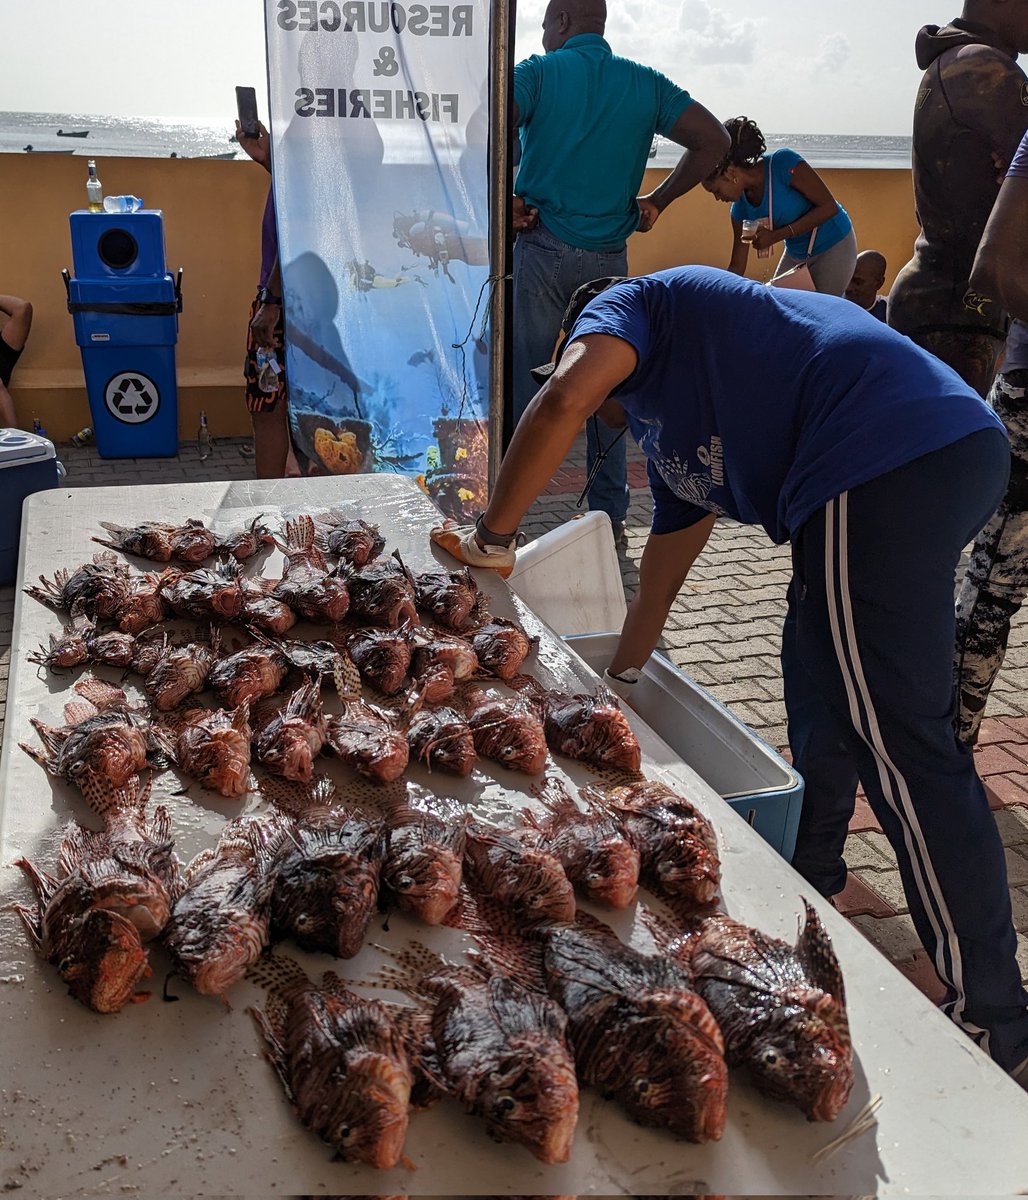 What a Day! 250 #lionfish culled from the waters around #Tobago. #marineinvasive #Caribbean #Trinidad #Pterois  #WorldOceanDay